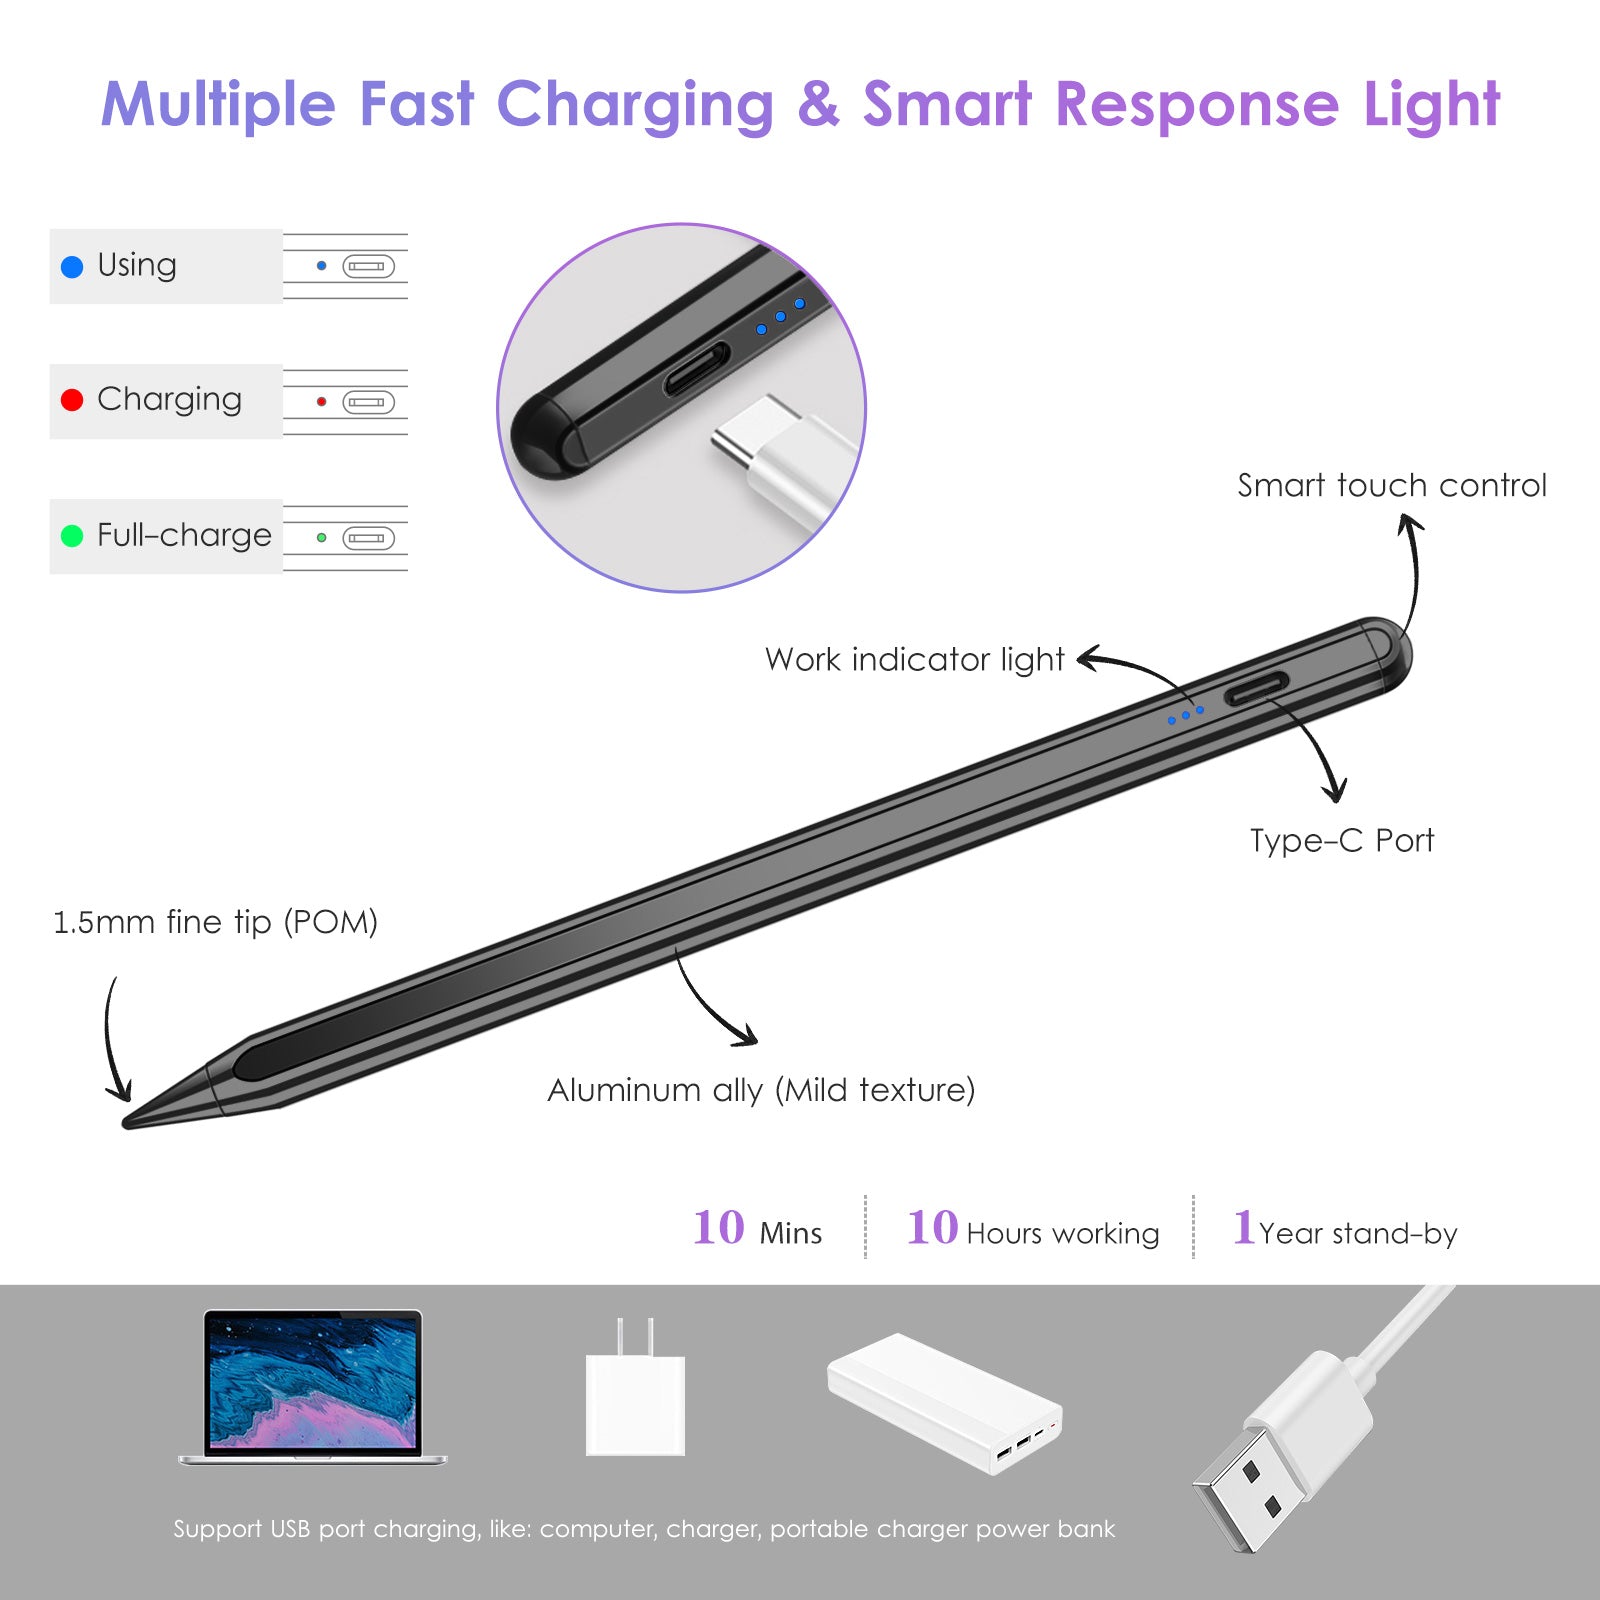 10 Mins Fast Charging Pencil for Apple iPad,Stylus with Palm Rejection,Precision and Low Latency for iPad 10th/9th/8th/7th/6th, iPad Pro 11&12.9 inch, iPad Mini 6th/5th, iPad Air 5th/4th/3rd Gen-White